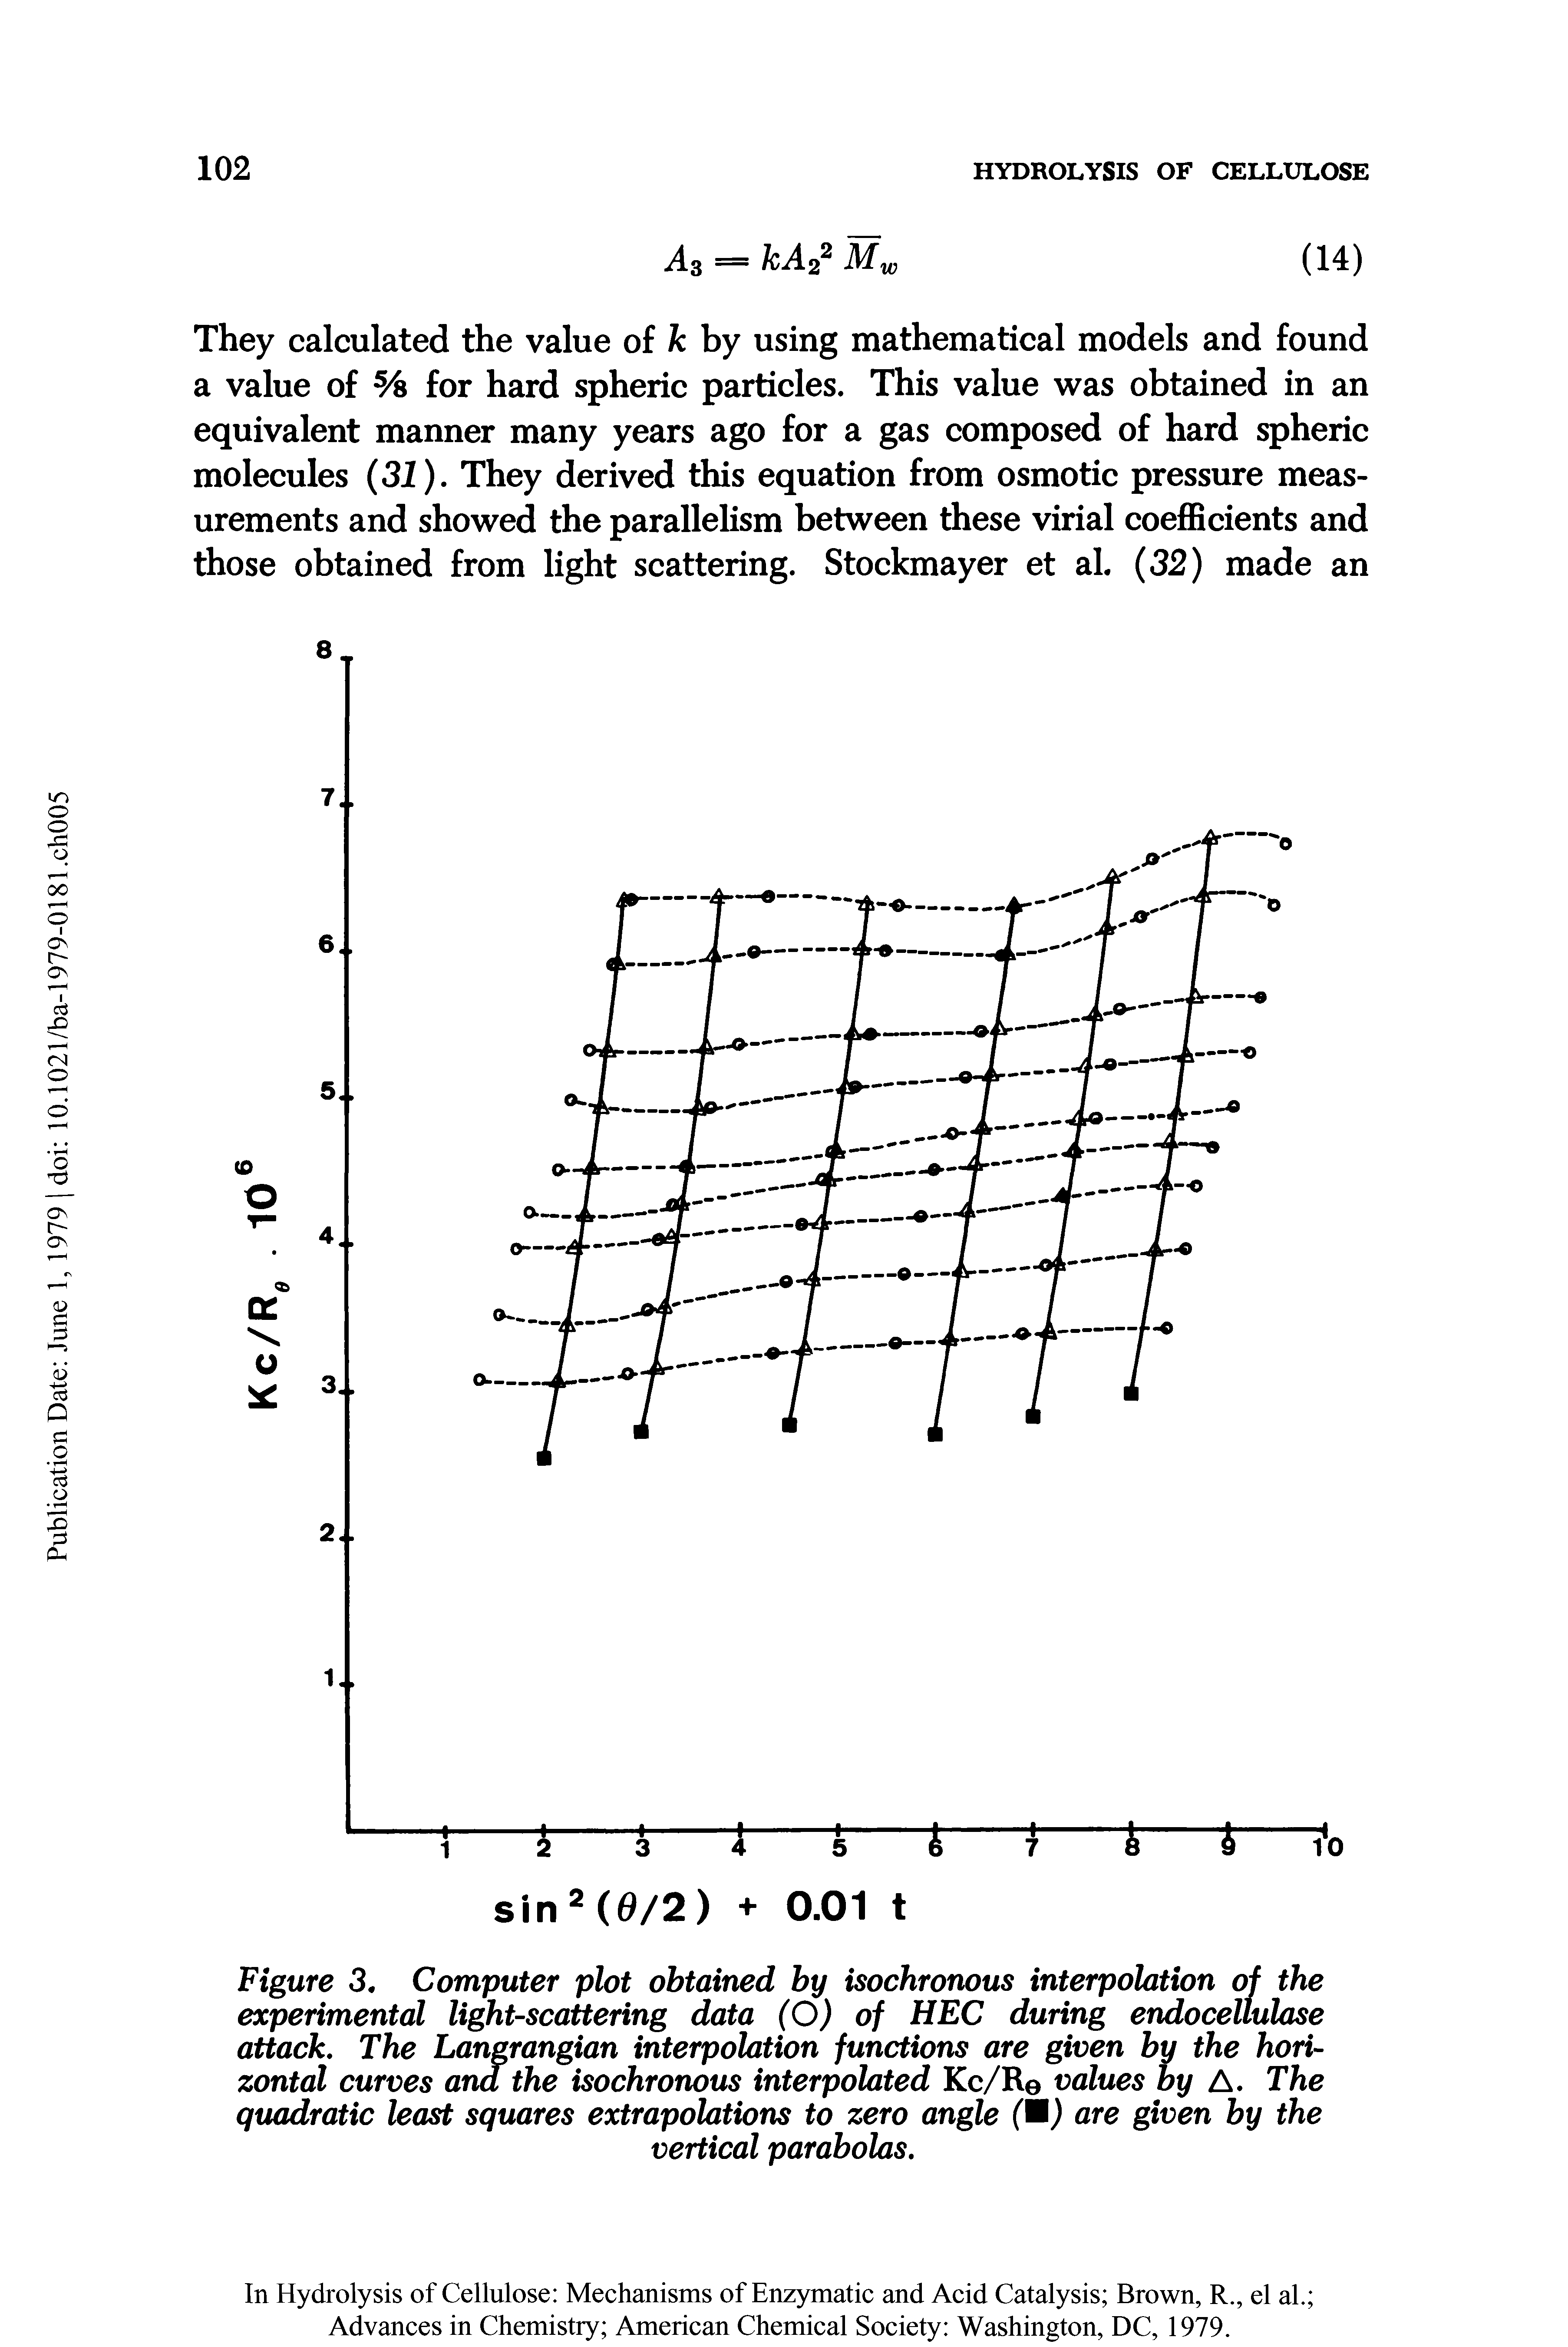 Figure 3. Computer plot obtained by isochronous interpolation of the experimental light-scattering data (O) of HEC during endocellulase attack. The Langrangian interpolation functions are given by the horizontal curves ana the isochronous interpolated Kc/Re values by A. The quadratic least squares extrapolations to zero angle ( ) are given by the...